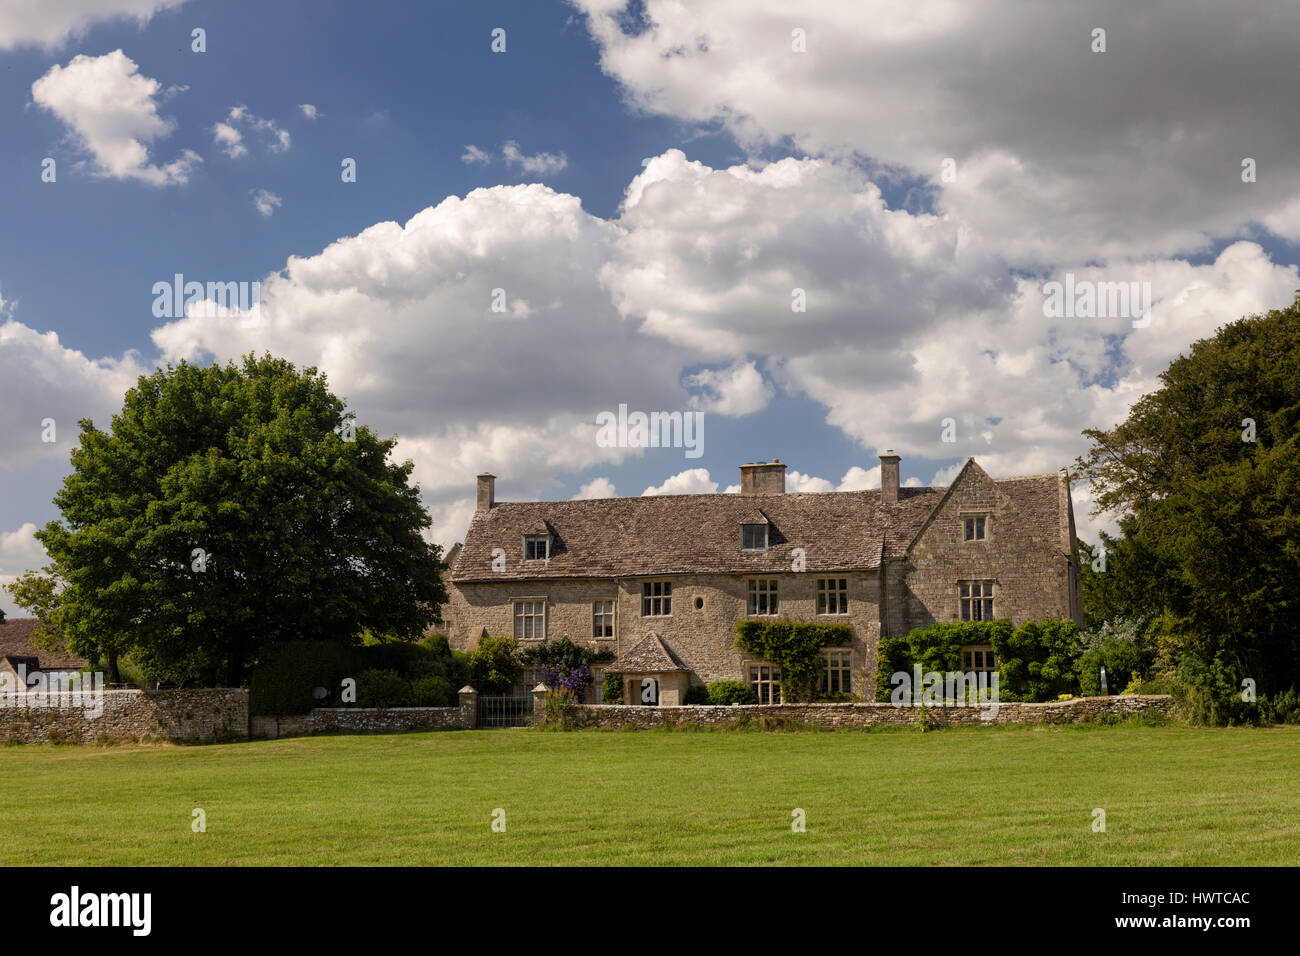 Cotswold stone manor house in the Gloucestershire village of Somerford Keynes near Cirencester Stock Photo